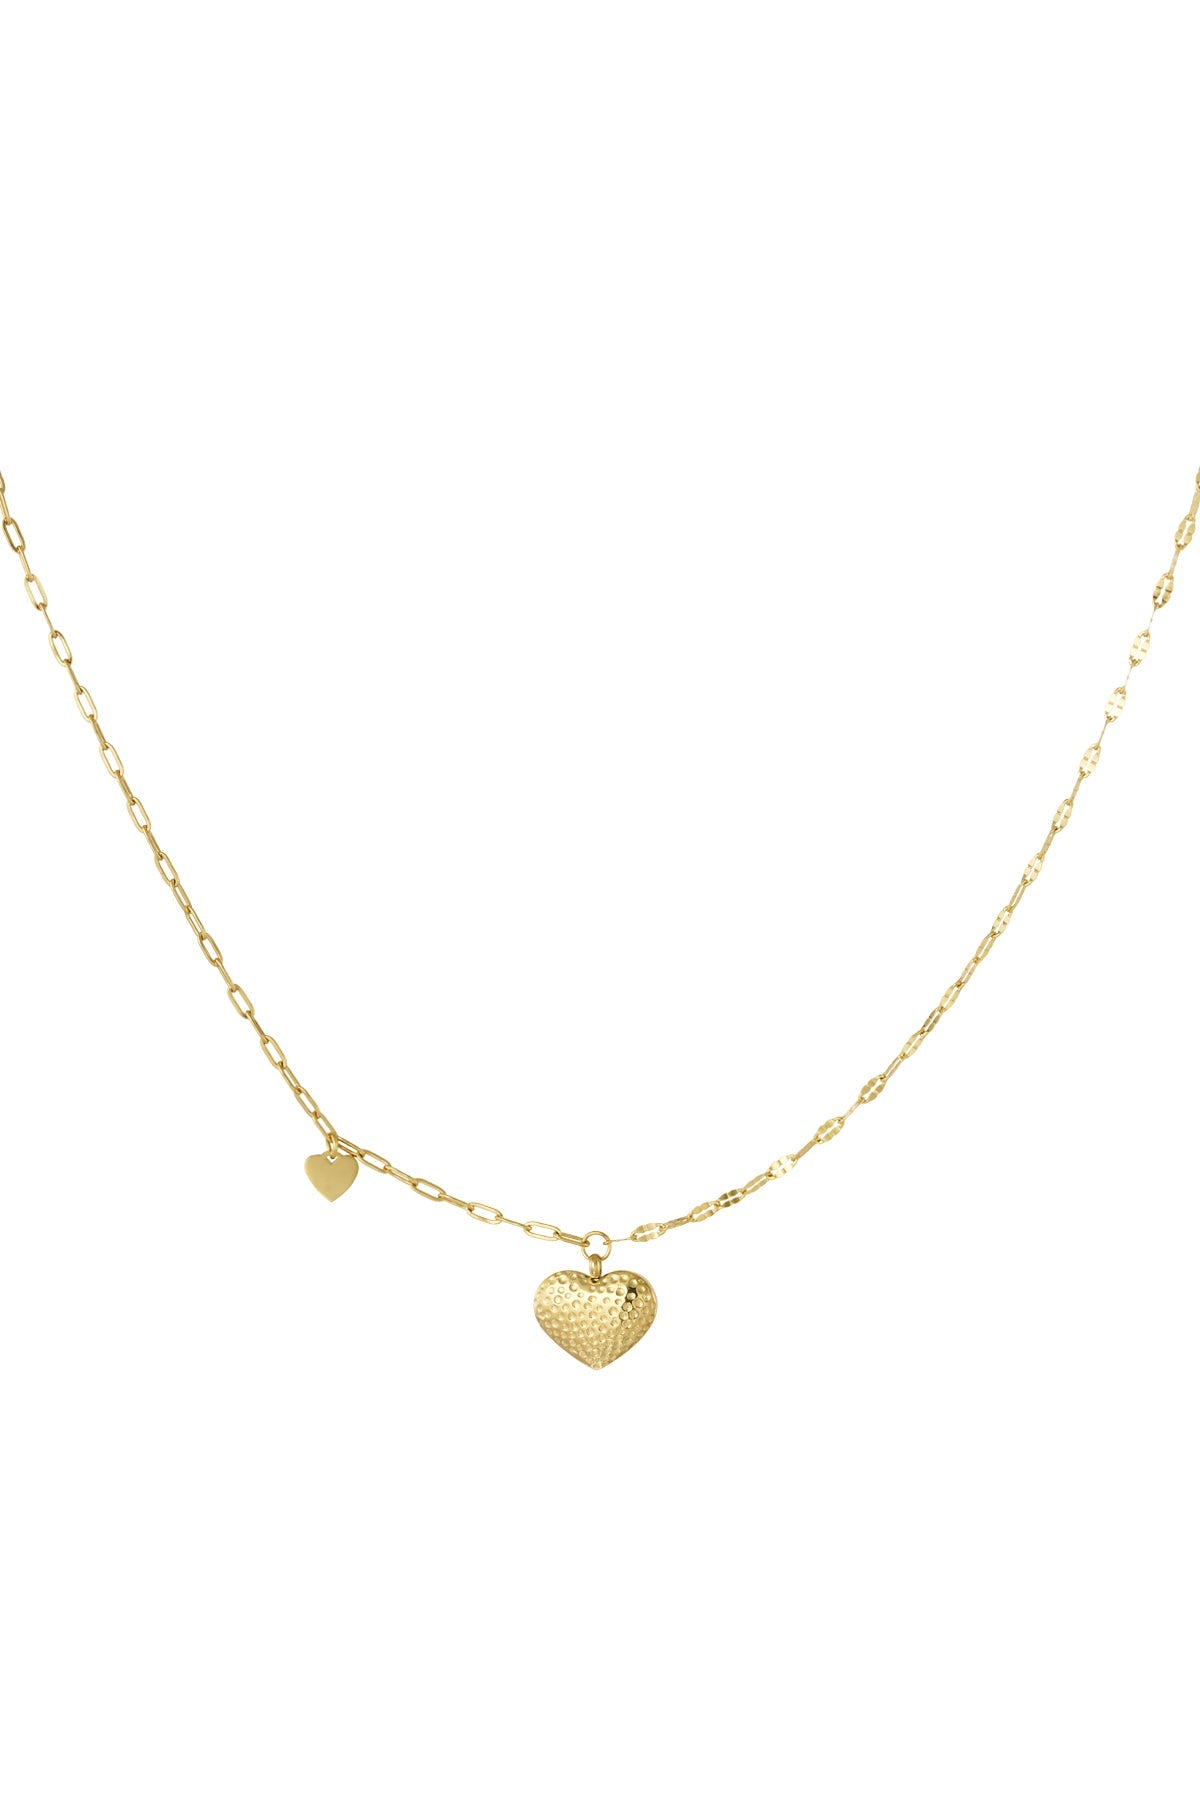 ♥︎DOUBLE HEART CHAIN KETTING - My Favourites